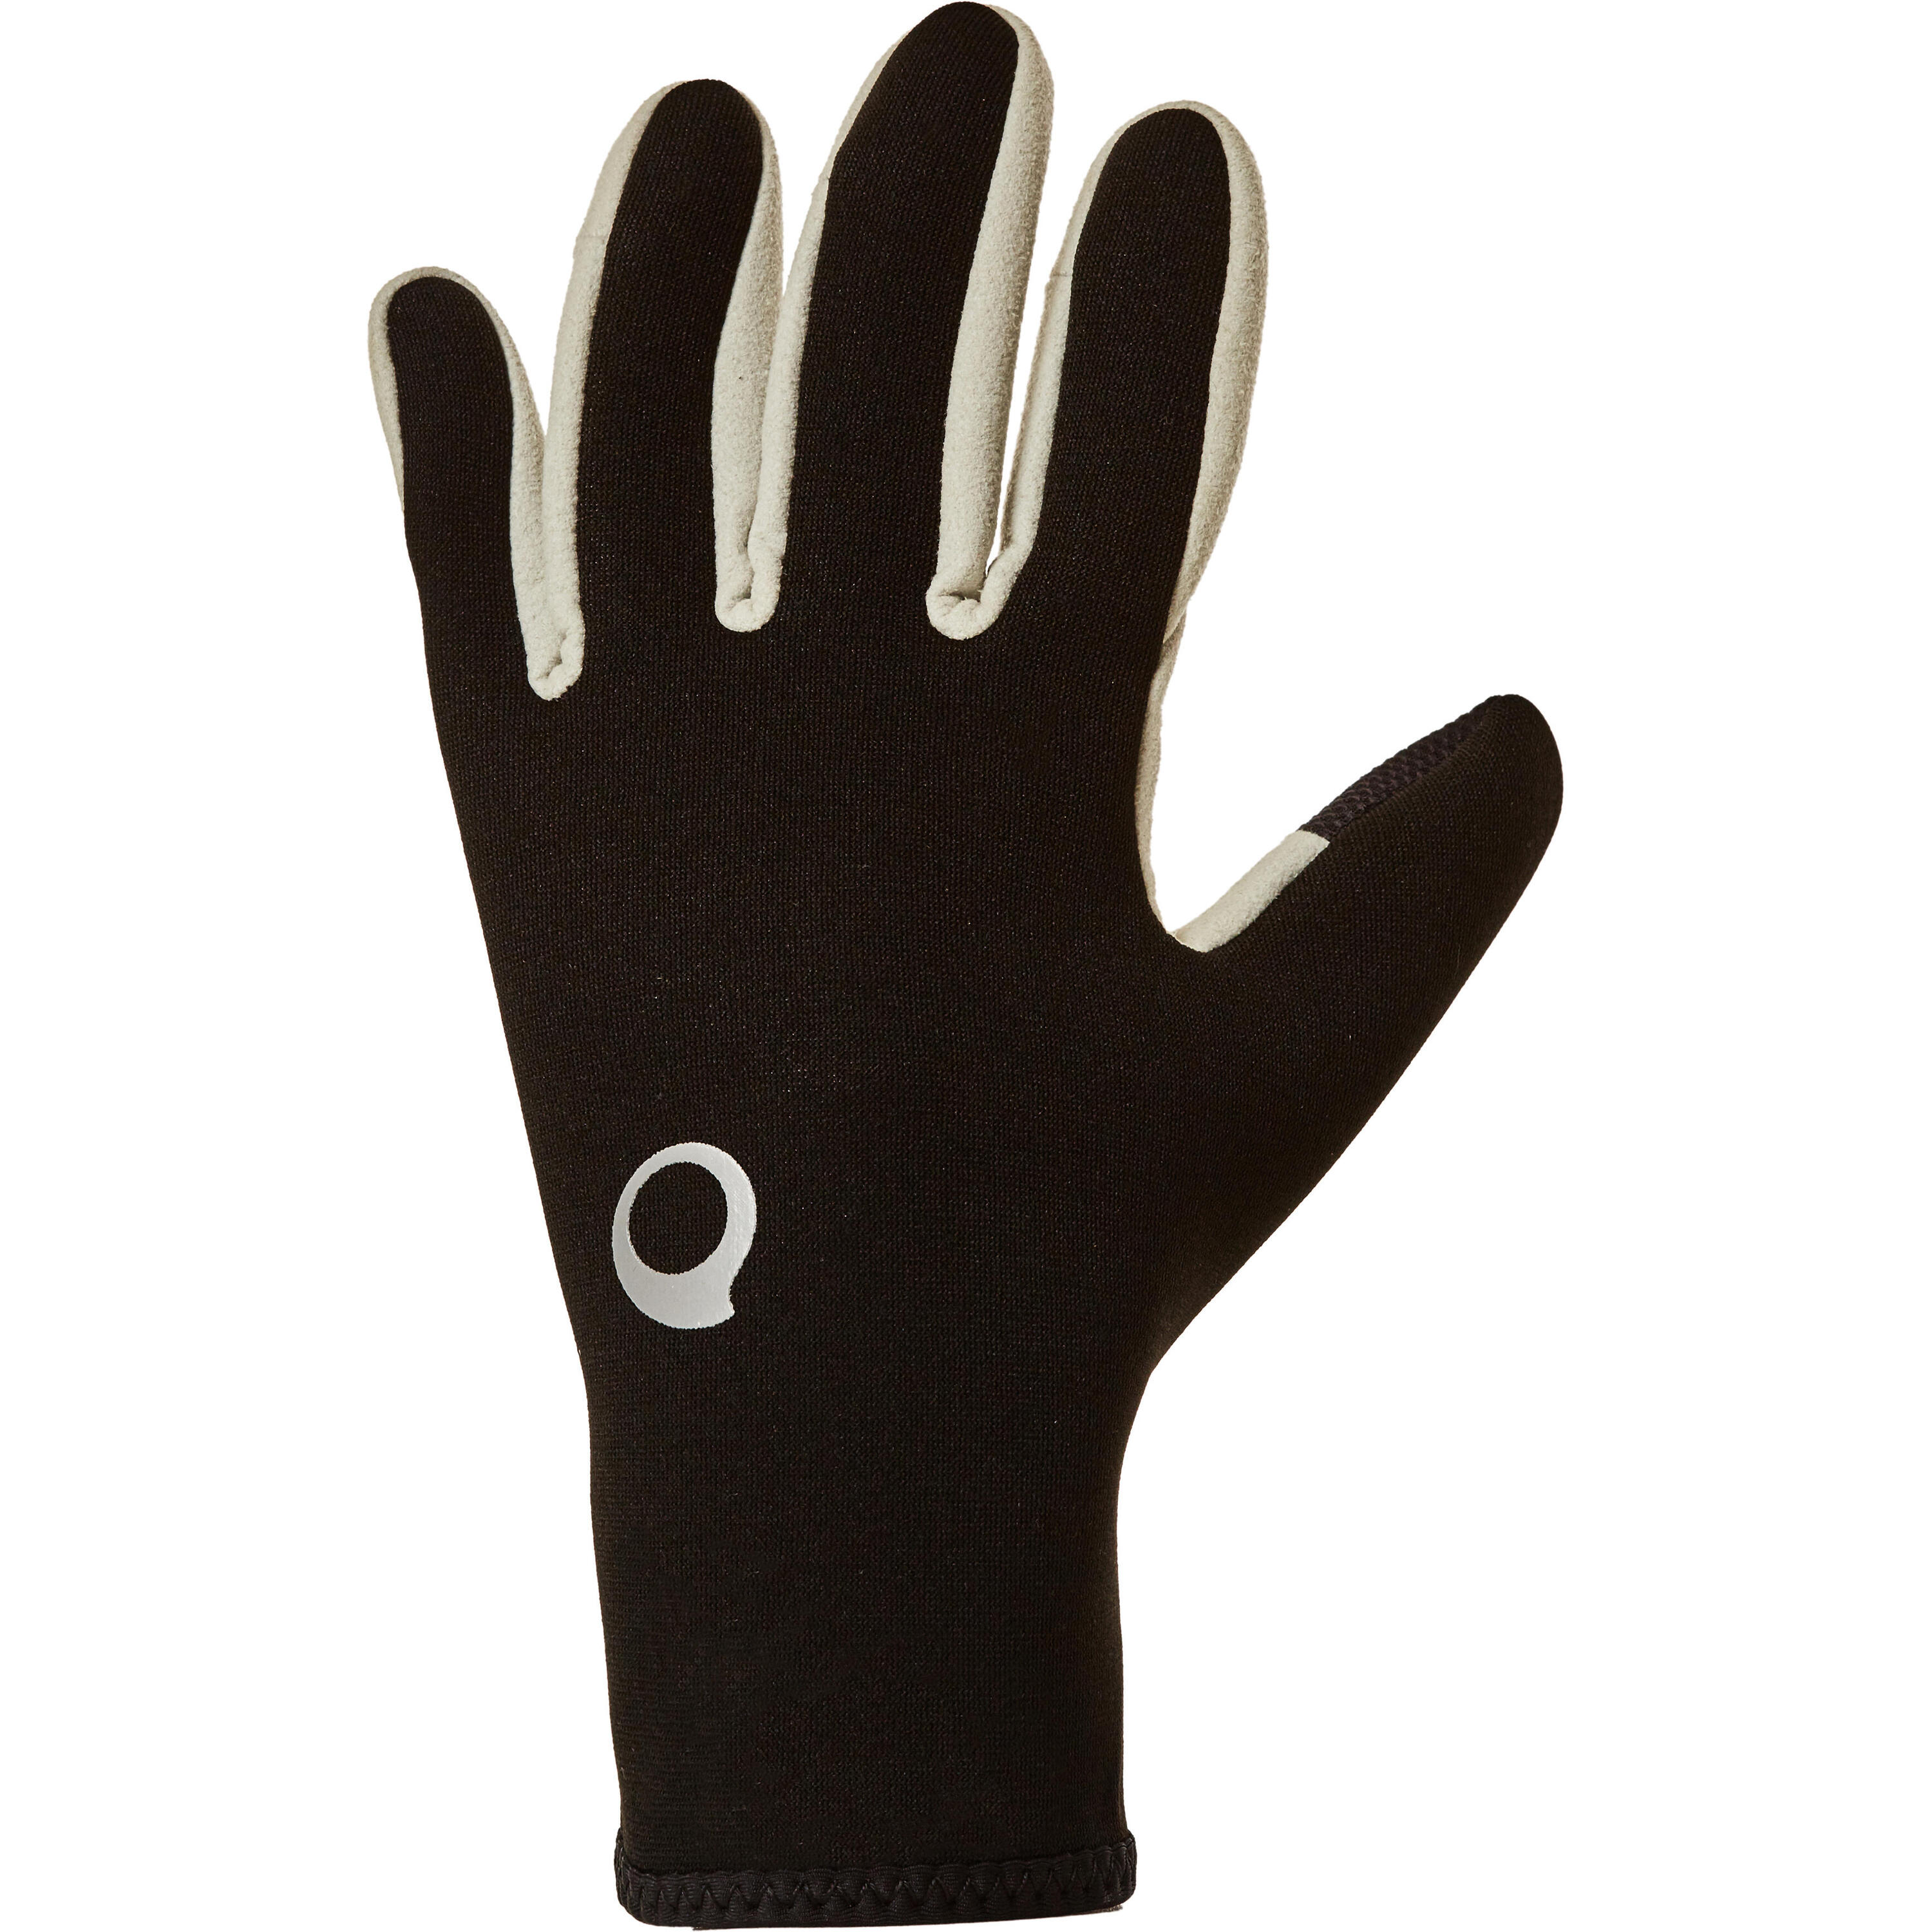 Supratex reinforced SPF 500 Spearfishing Gloves 2 mm SUBEA